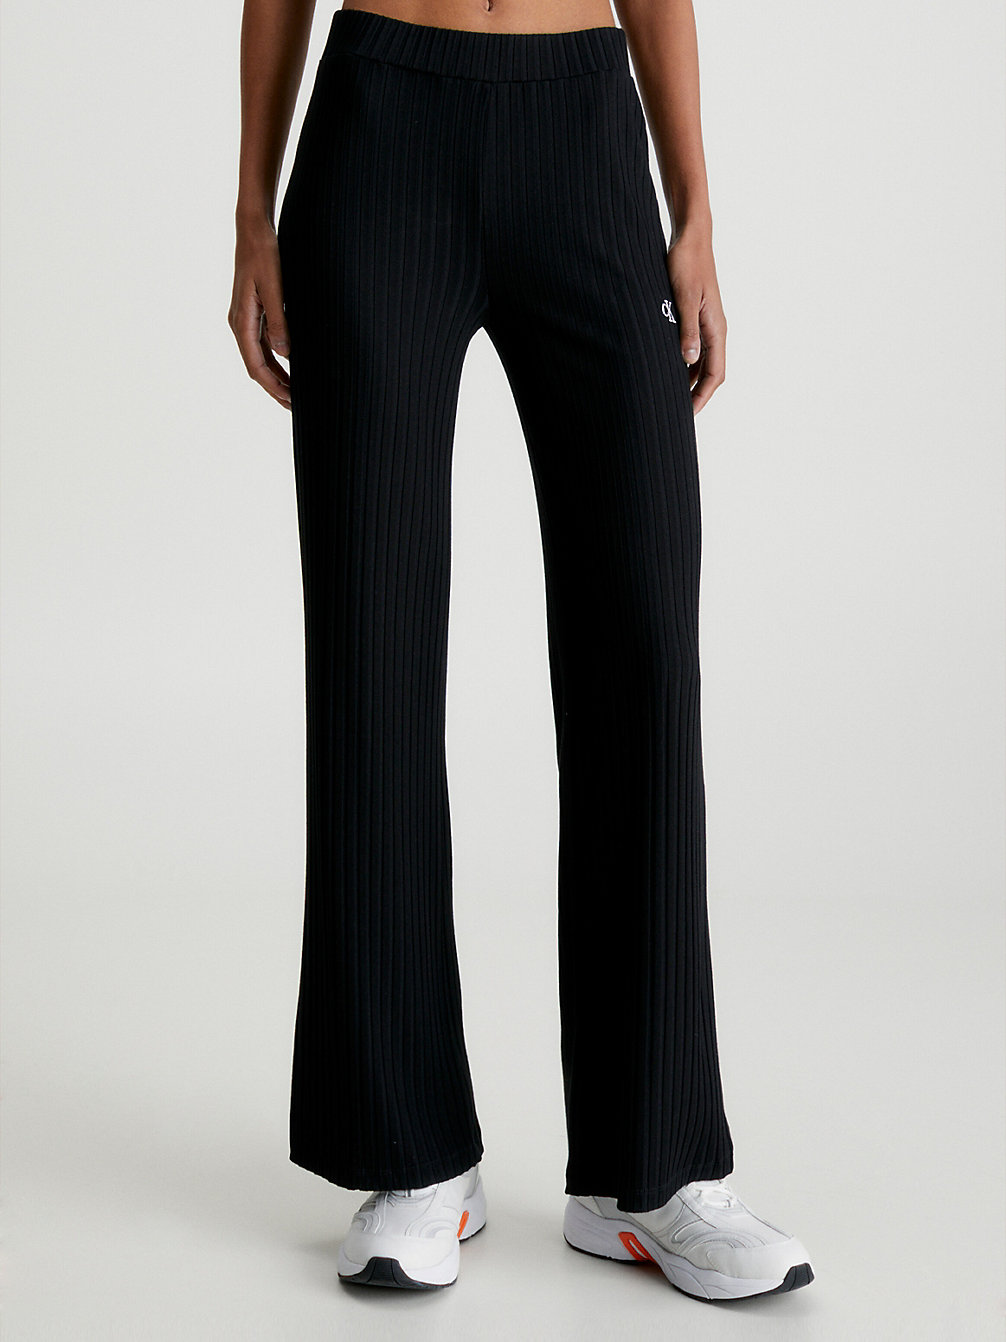 CK BLACK Ribbed Jersey Flared Trousers undefined women Calvin Klein